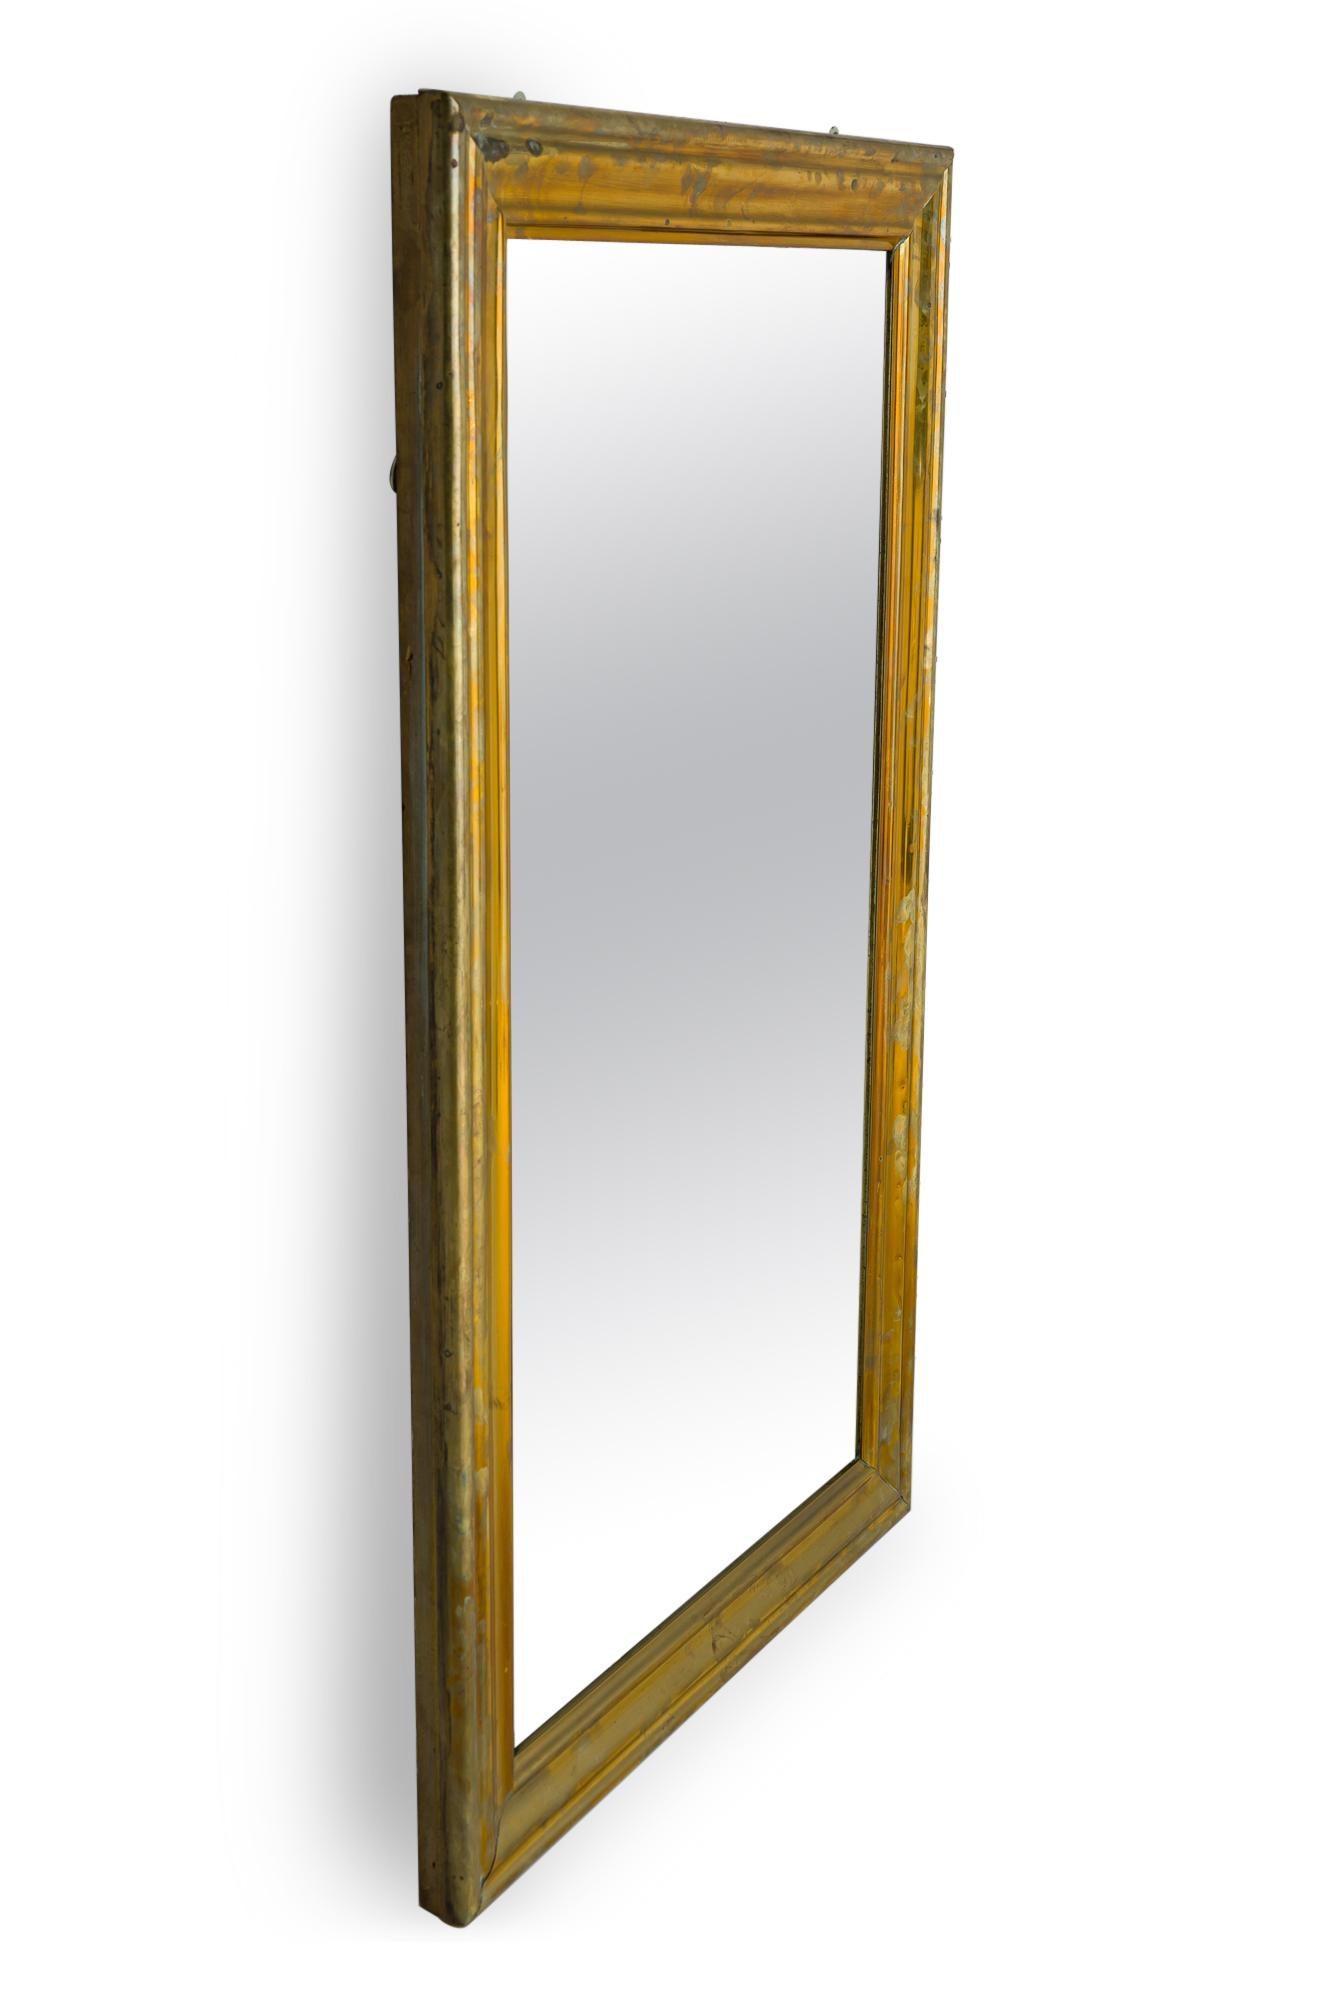 American Mid-Century bistro / wall mirror with a rectangular ogee frame finished with patinated brass veneer. (Similar mirror: DUA0024).